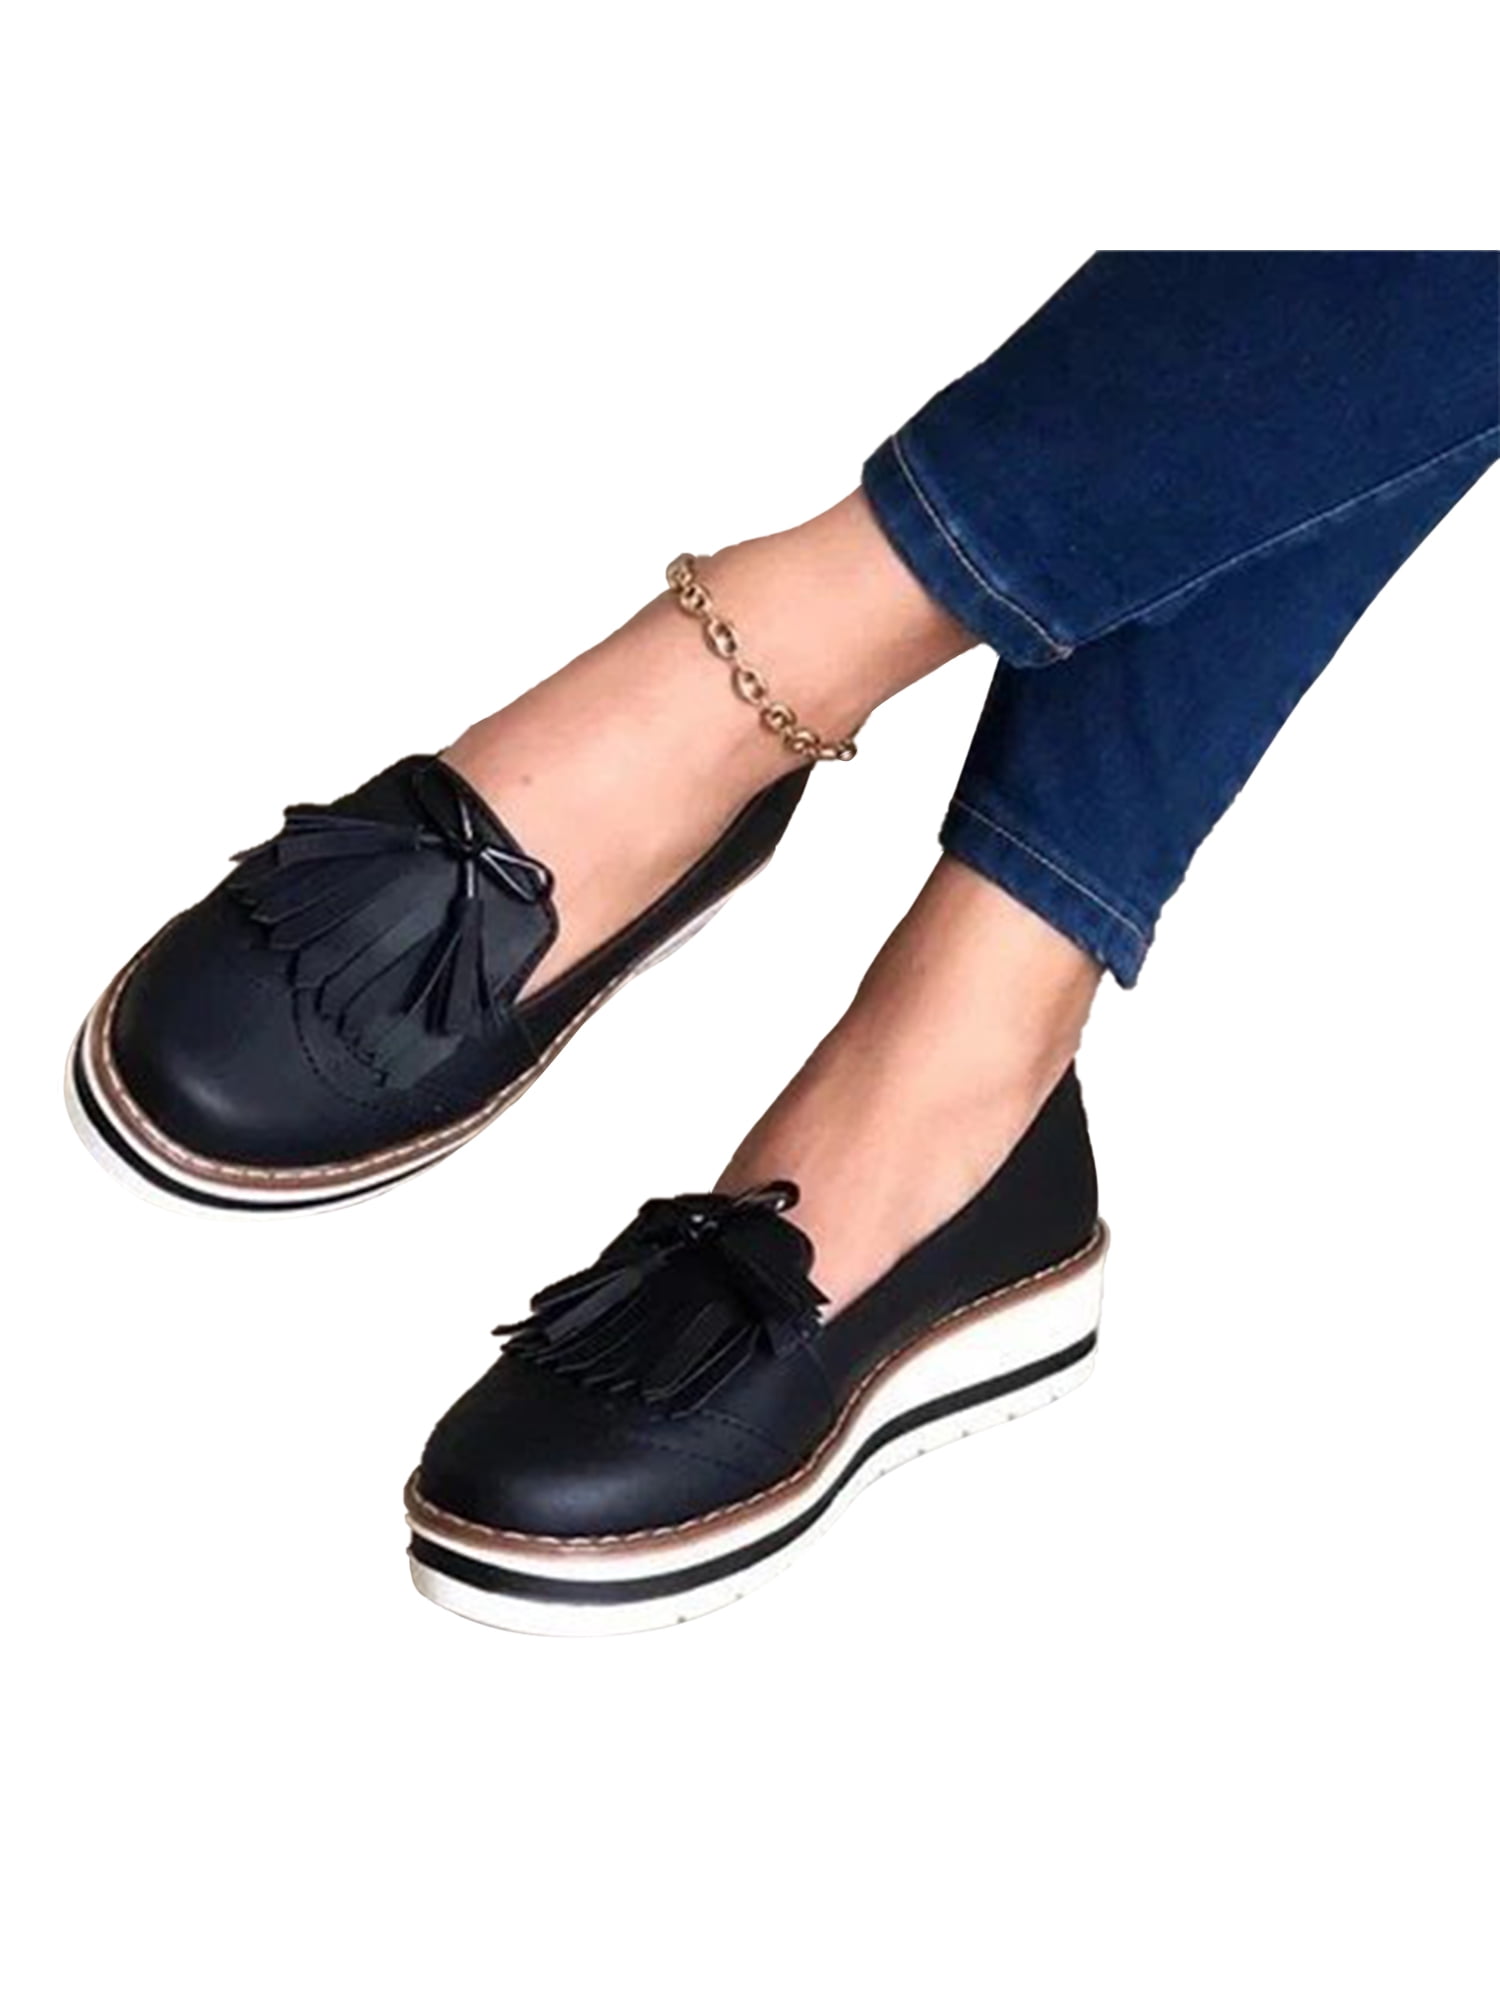 Ladies Women Leather Deck Casual Boat Work Casual Moccasins Loafers Slip On Shoe 